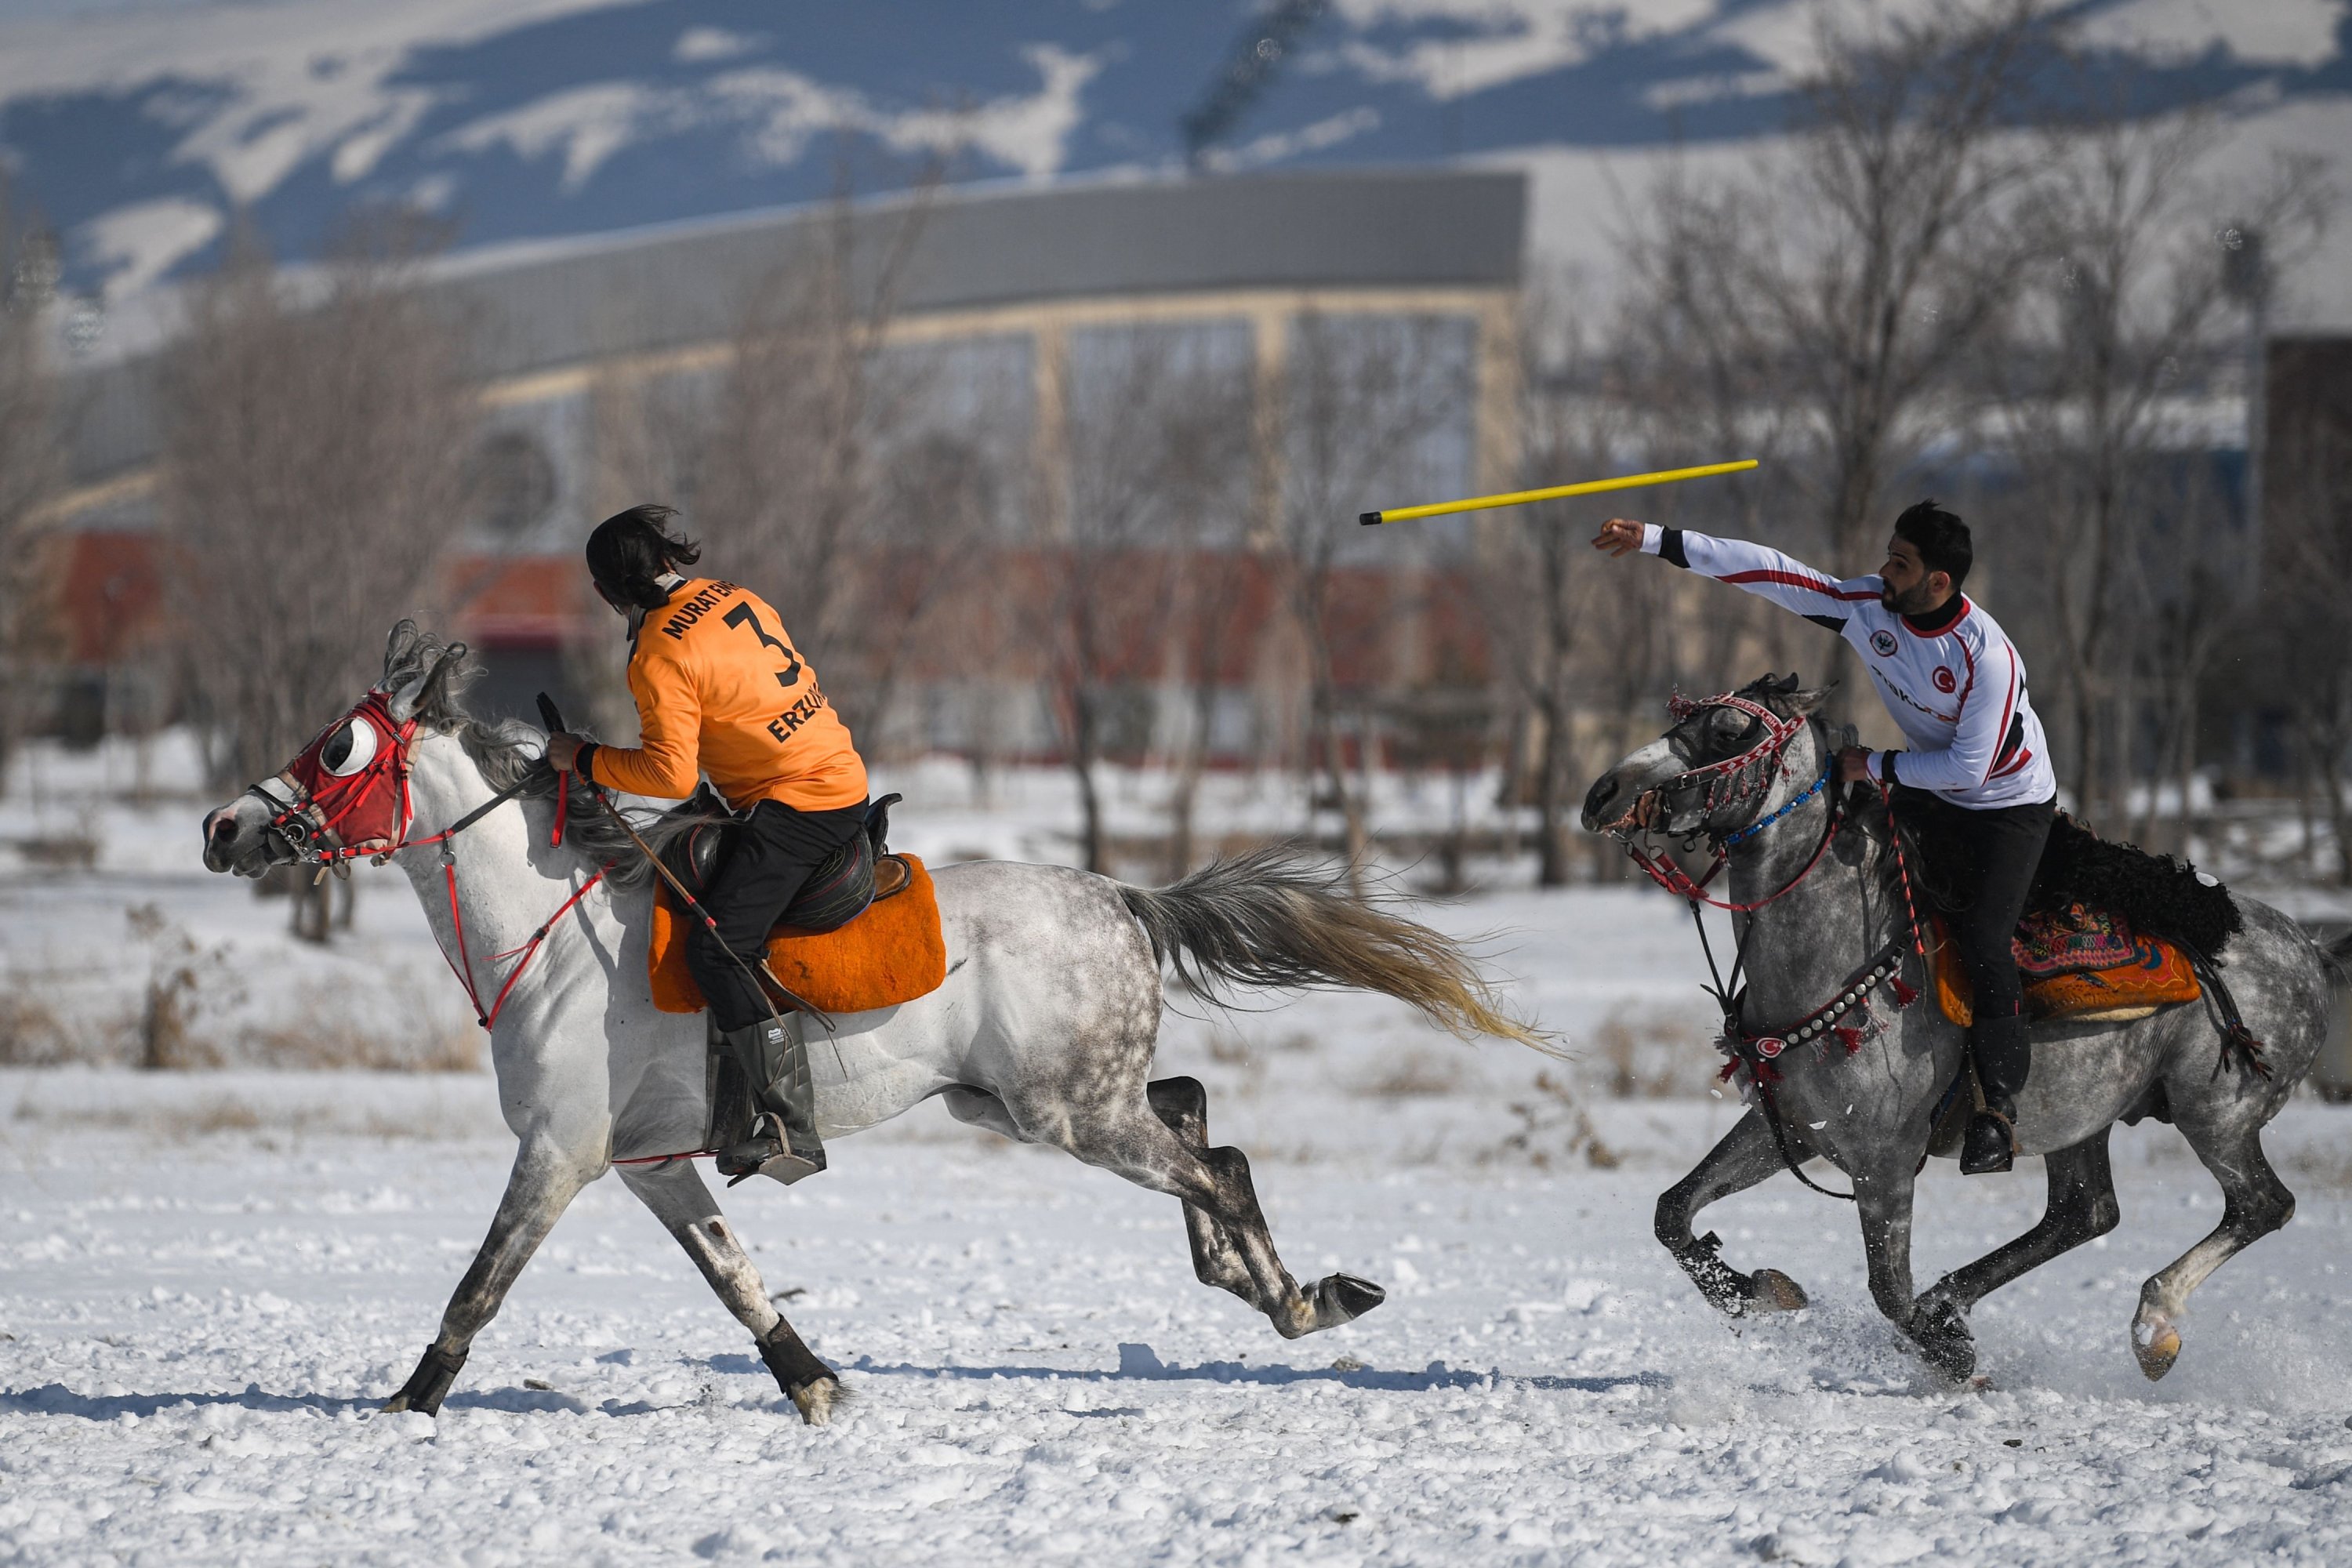 A competitor (R) prepares to throw a javelin toward an opponent during a Turkish cirit game, Erzurum, eastern Turkey, March 5, 2021.